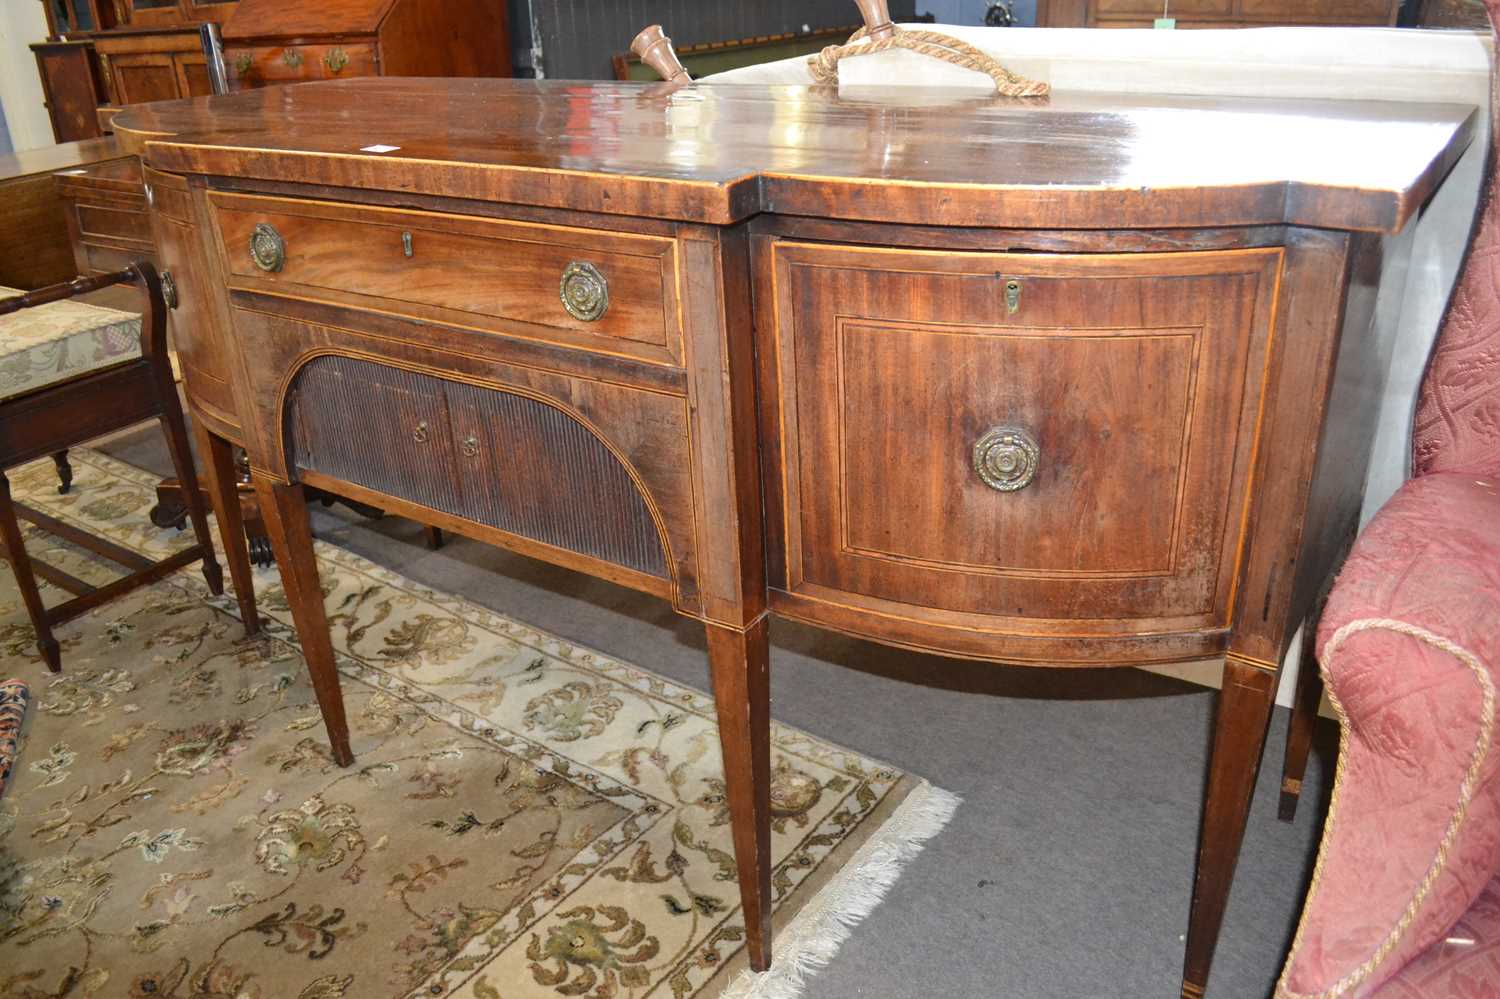 Georgian mahogany break front sideboard with two deep drawers, a shallow centre drawer and a - Image 2 of 2